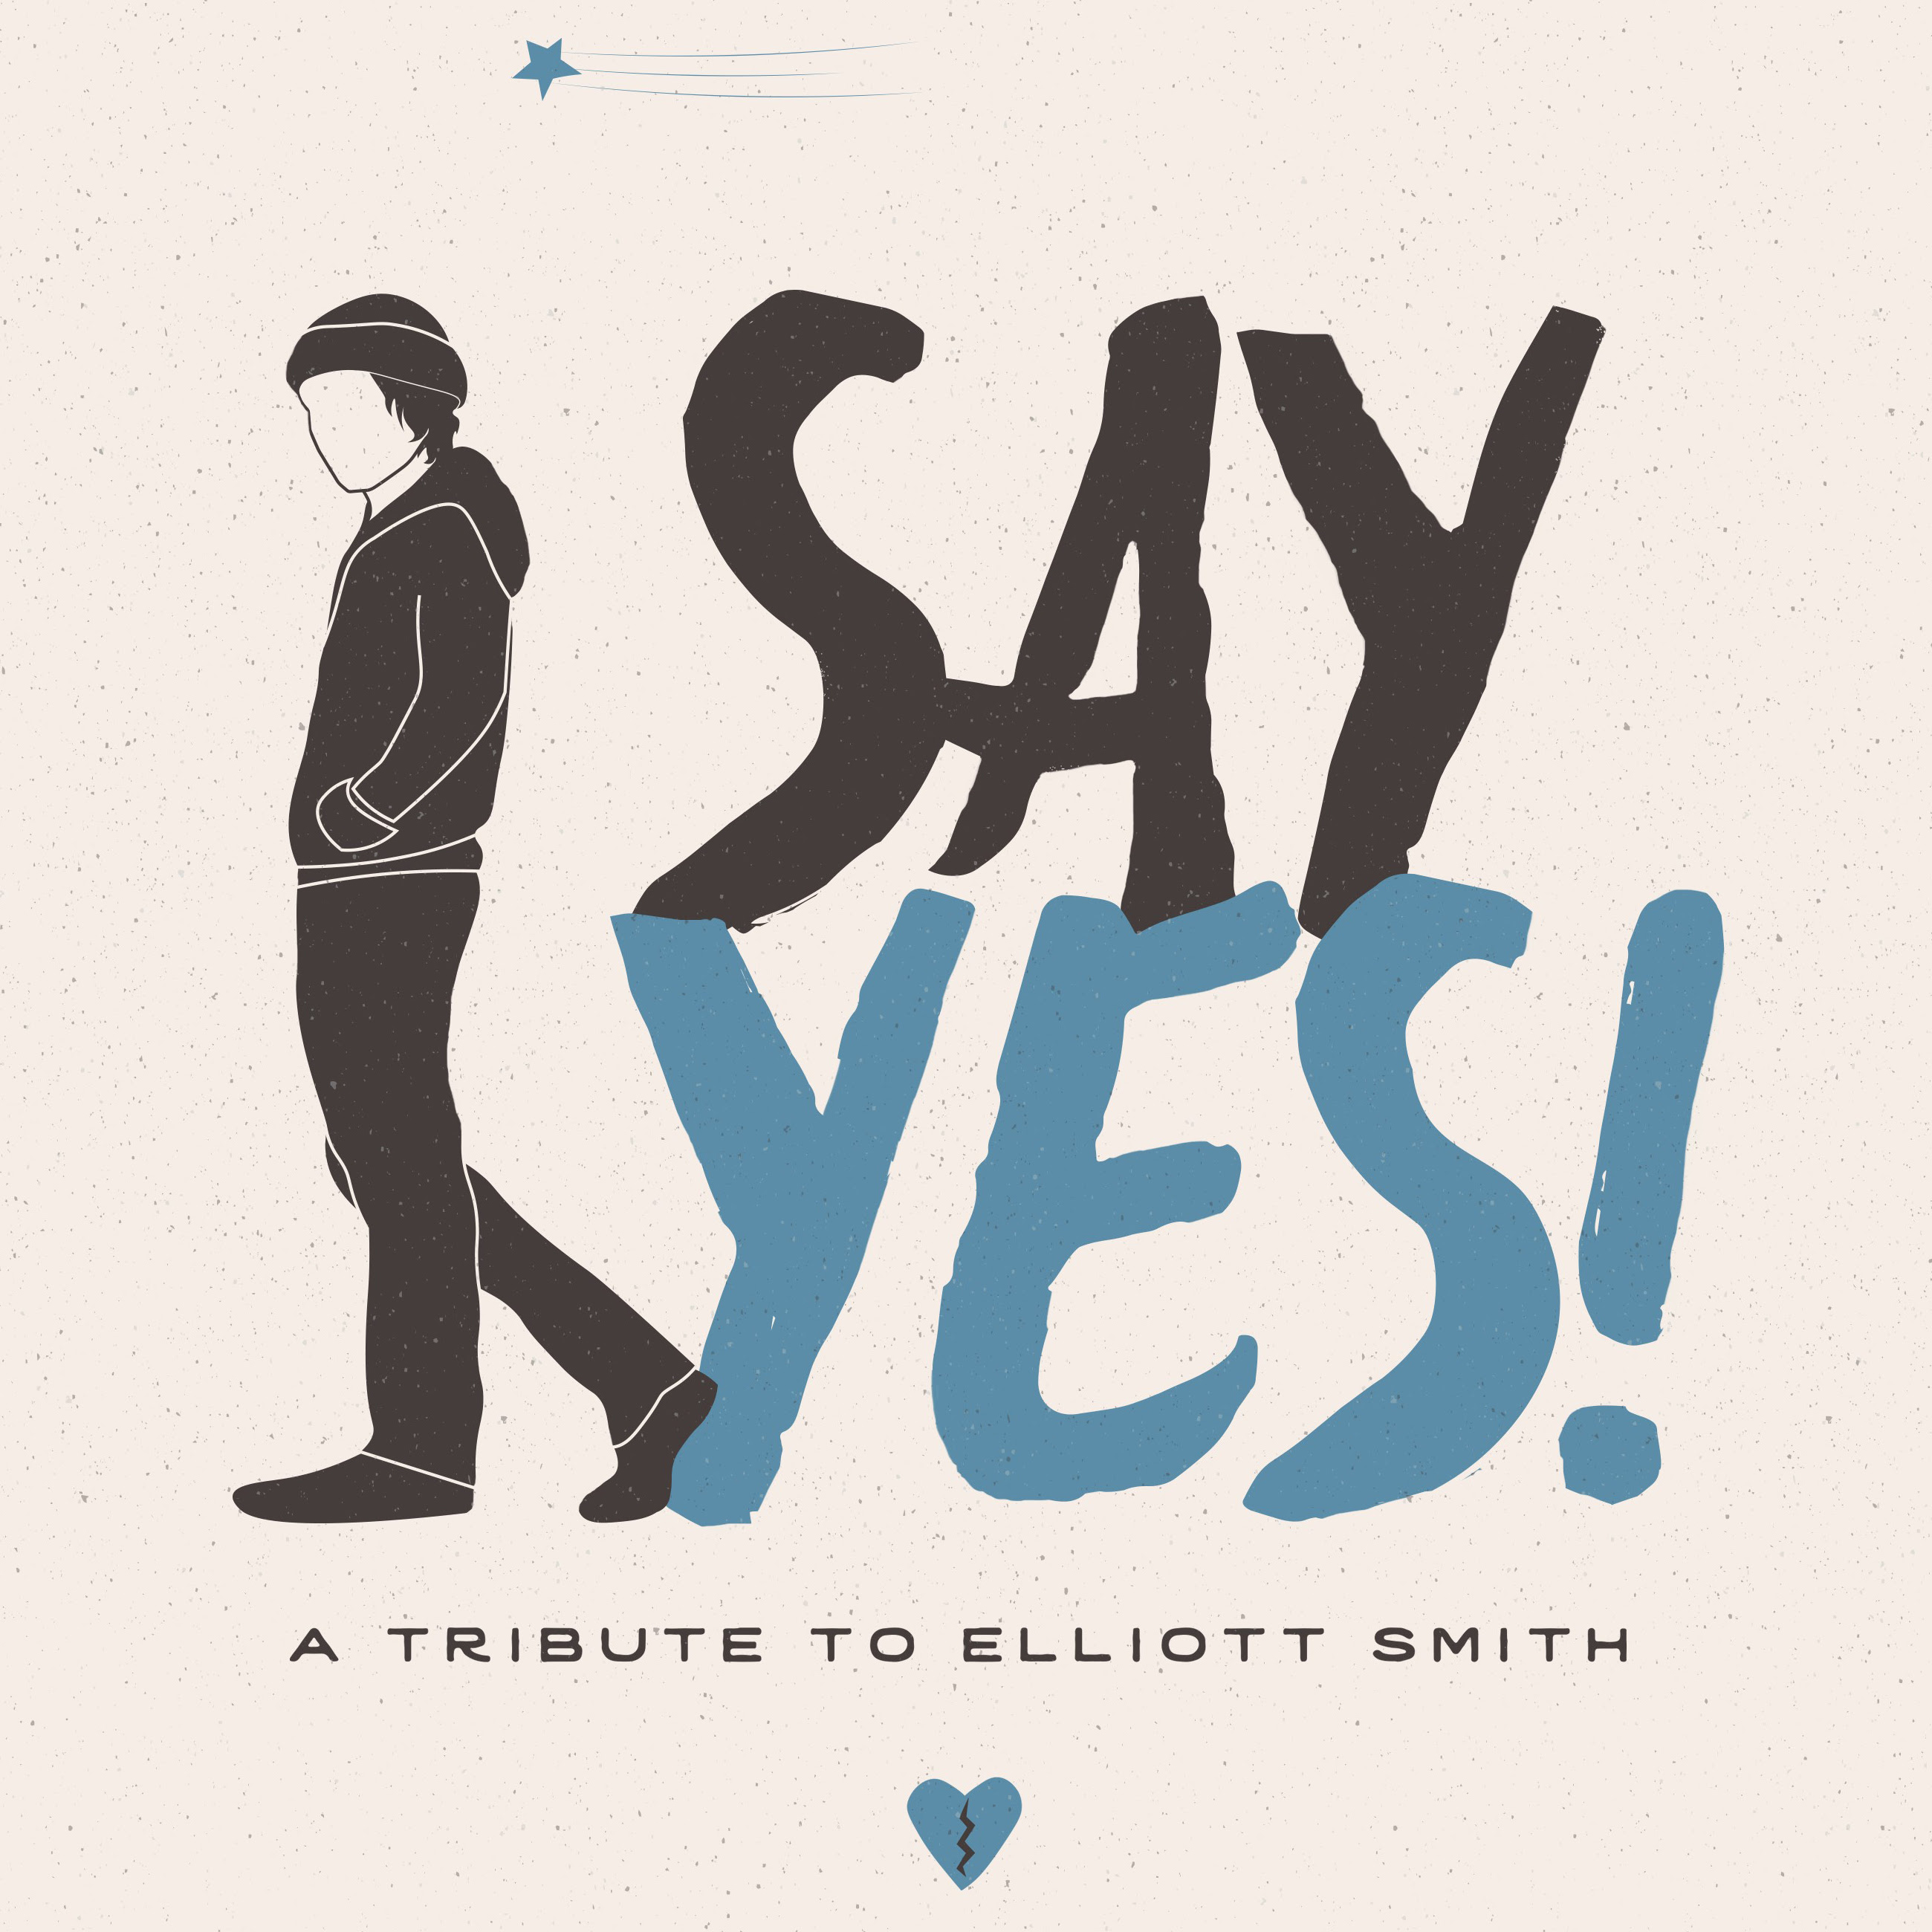 ELLIOTT SMITH TRIBUTE ALBUM OUT OCT. 14; STREAM TANYA DONELLY’S VERSION OF ‘BETWEEN THE BARS’